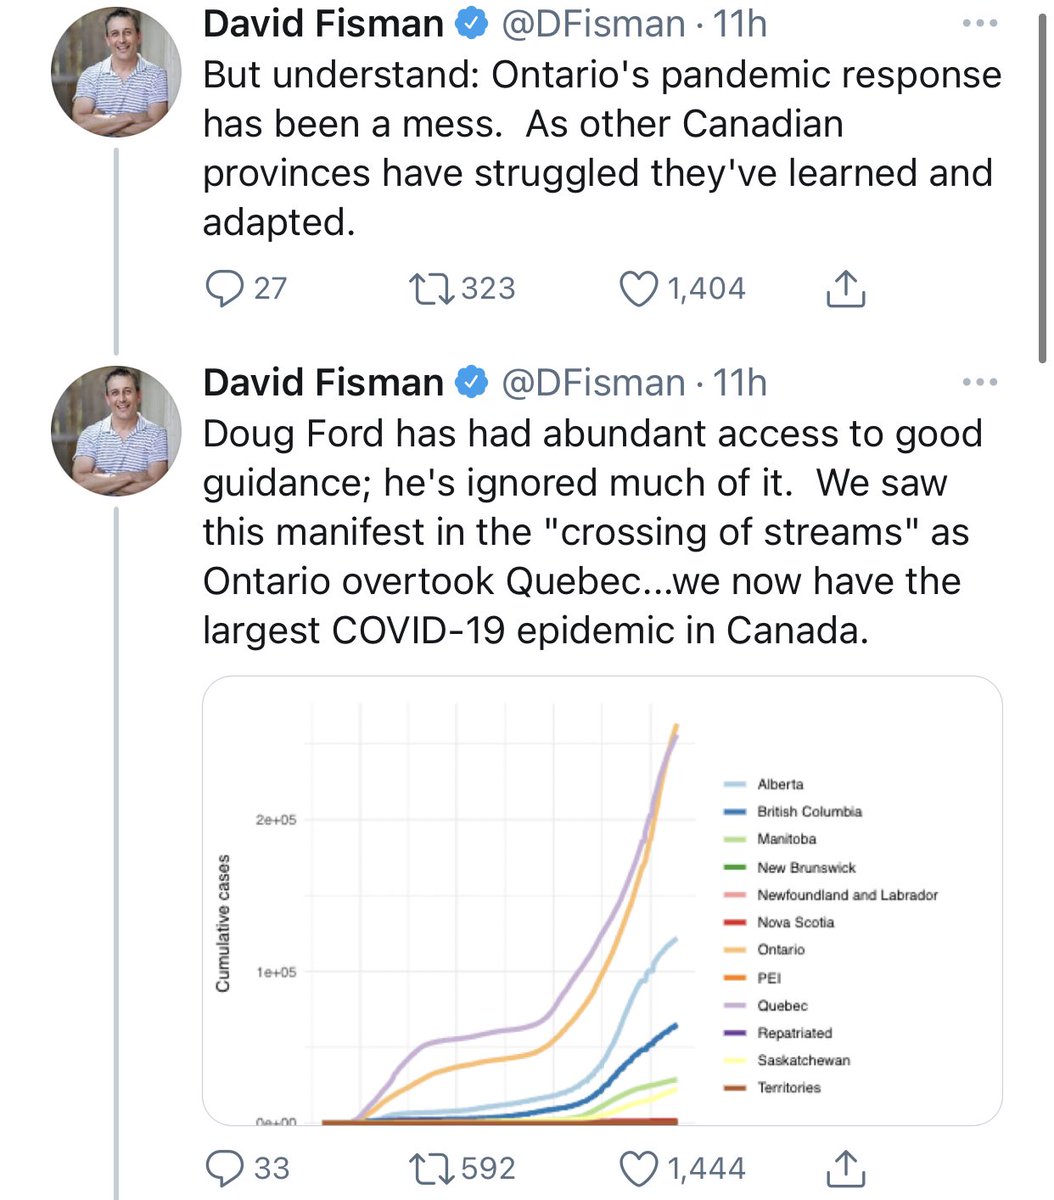 14/ Even the members of your own Science Table have turned on you, even they publicly blame & ridicule you. These pseudo-experts that have huge conflicts only answer to the highest bidder; currency is their language #COVID19  #Canada  #Ontario  #cdnpoli  #onpoli  #lockdown